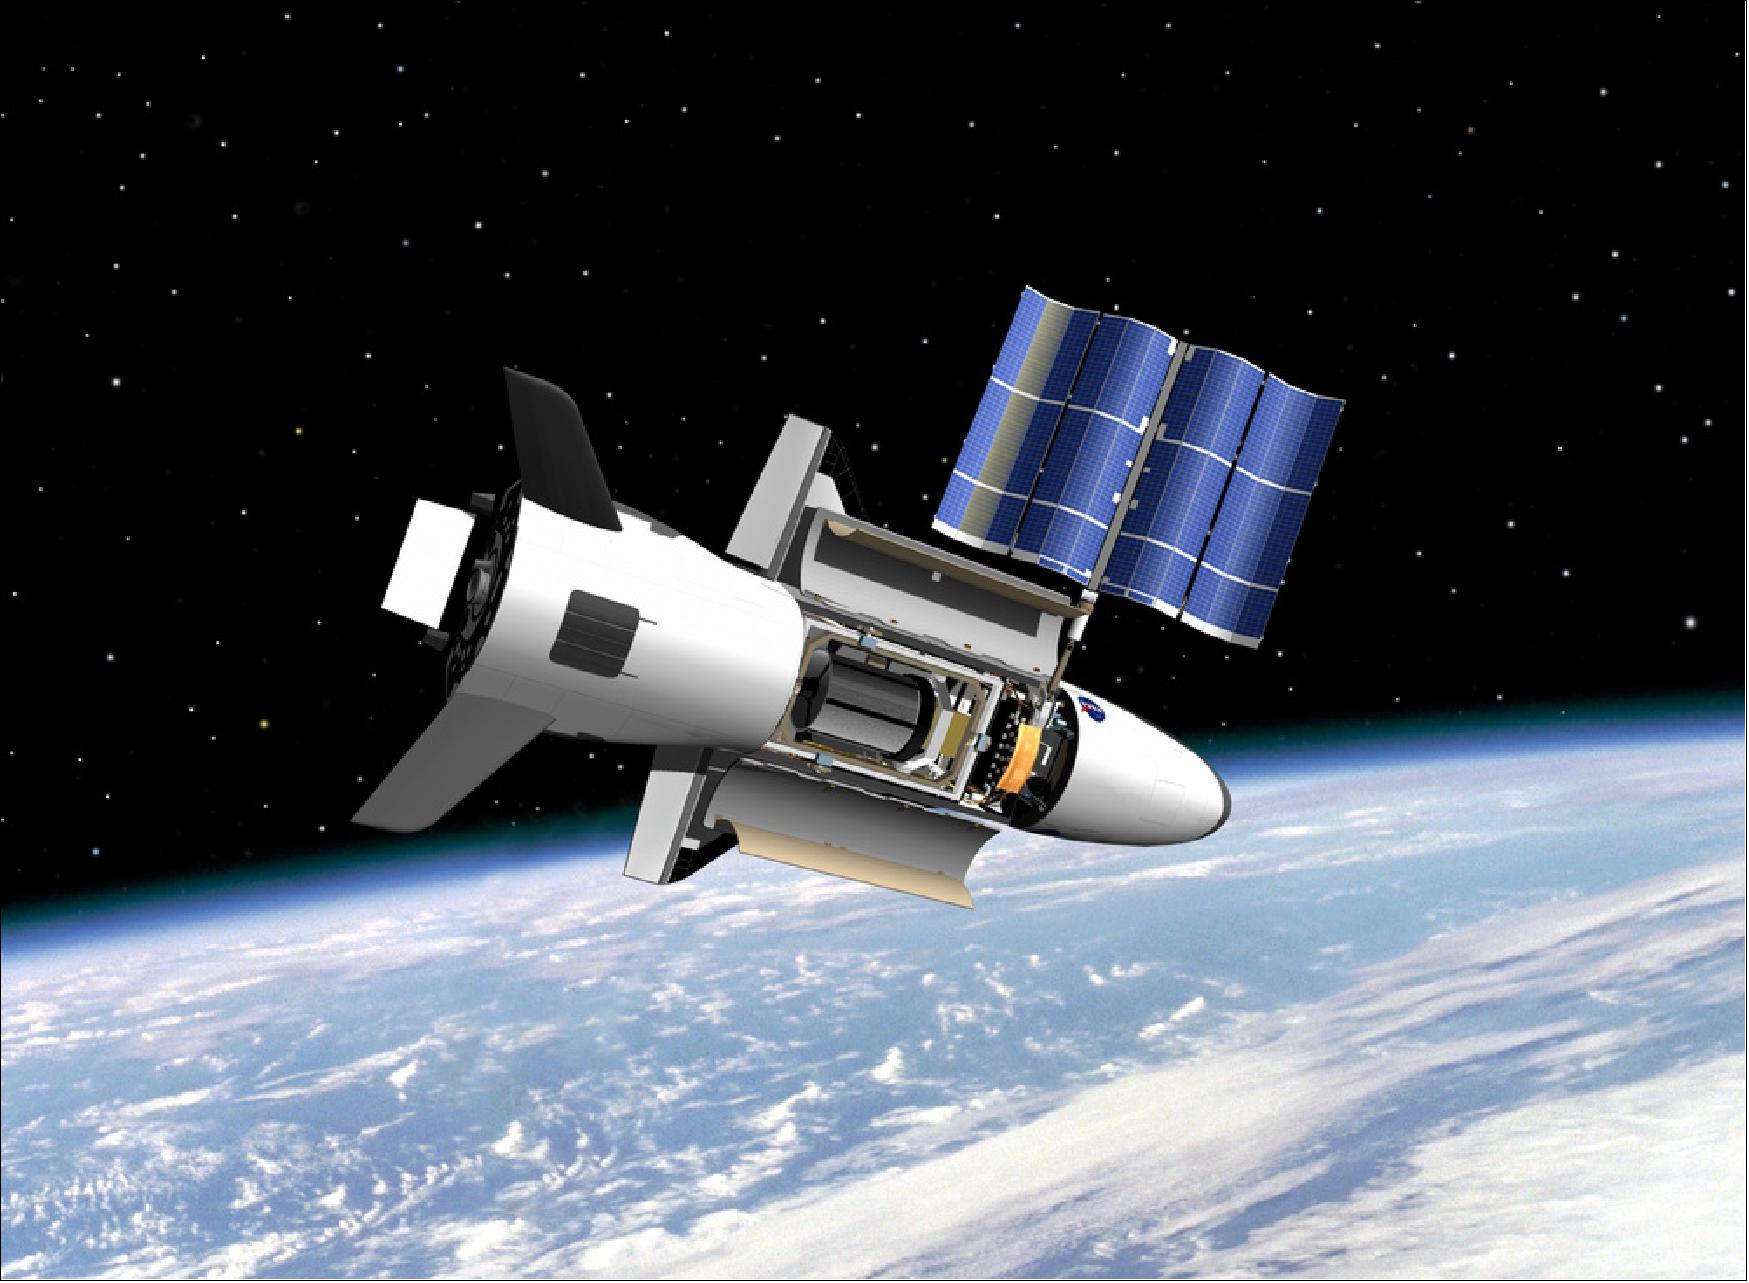 Figure 6: Artist's rendition of the X-37B spaceplane (OTV-5) with the deployed solar panels (image credit: Boeing Phantom Works)